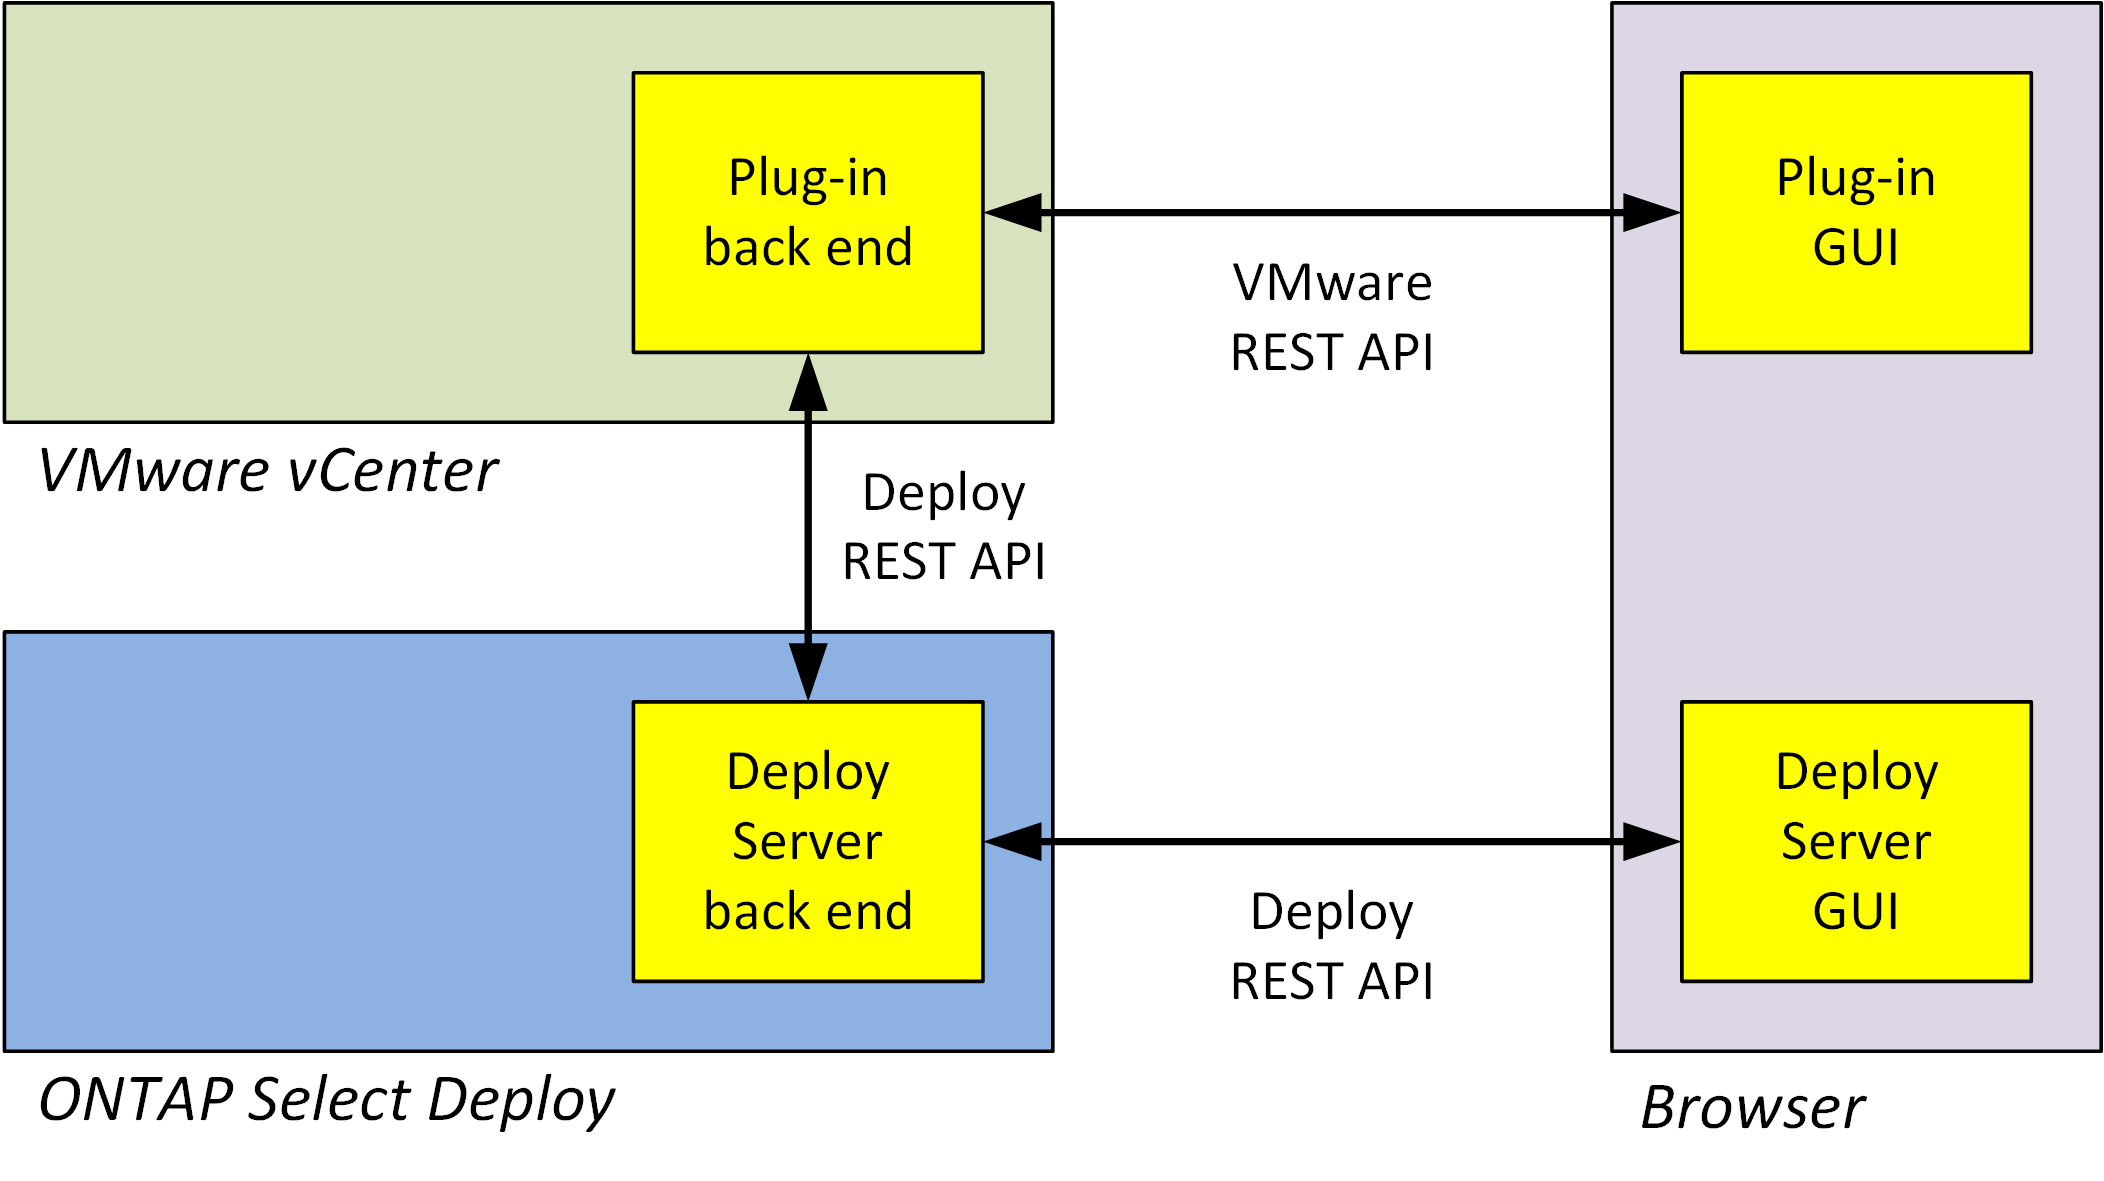 Illustrates the architecture of the Deploy vCenter plug-in.